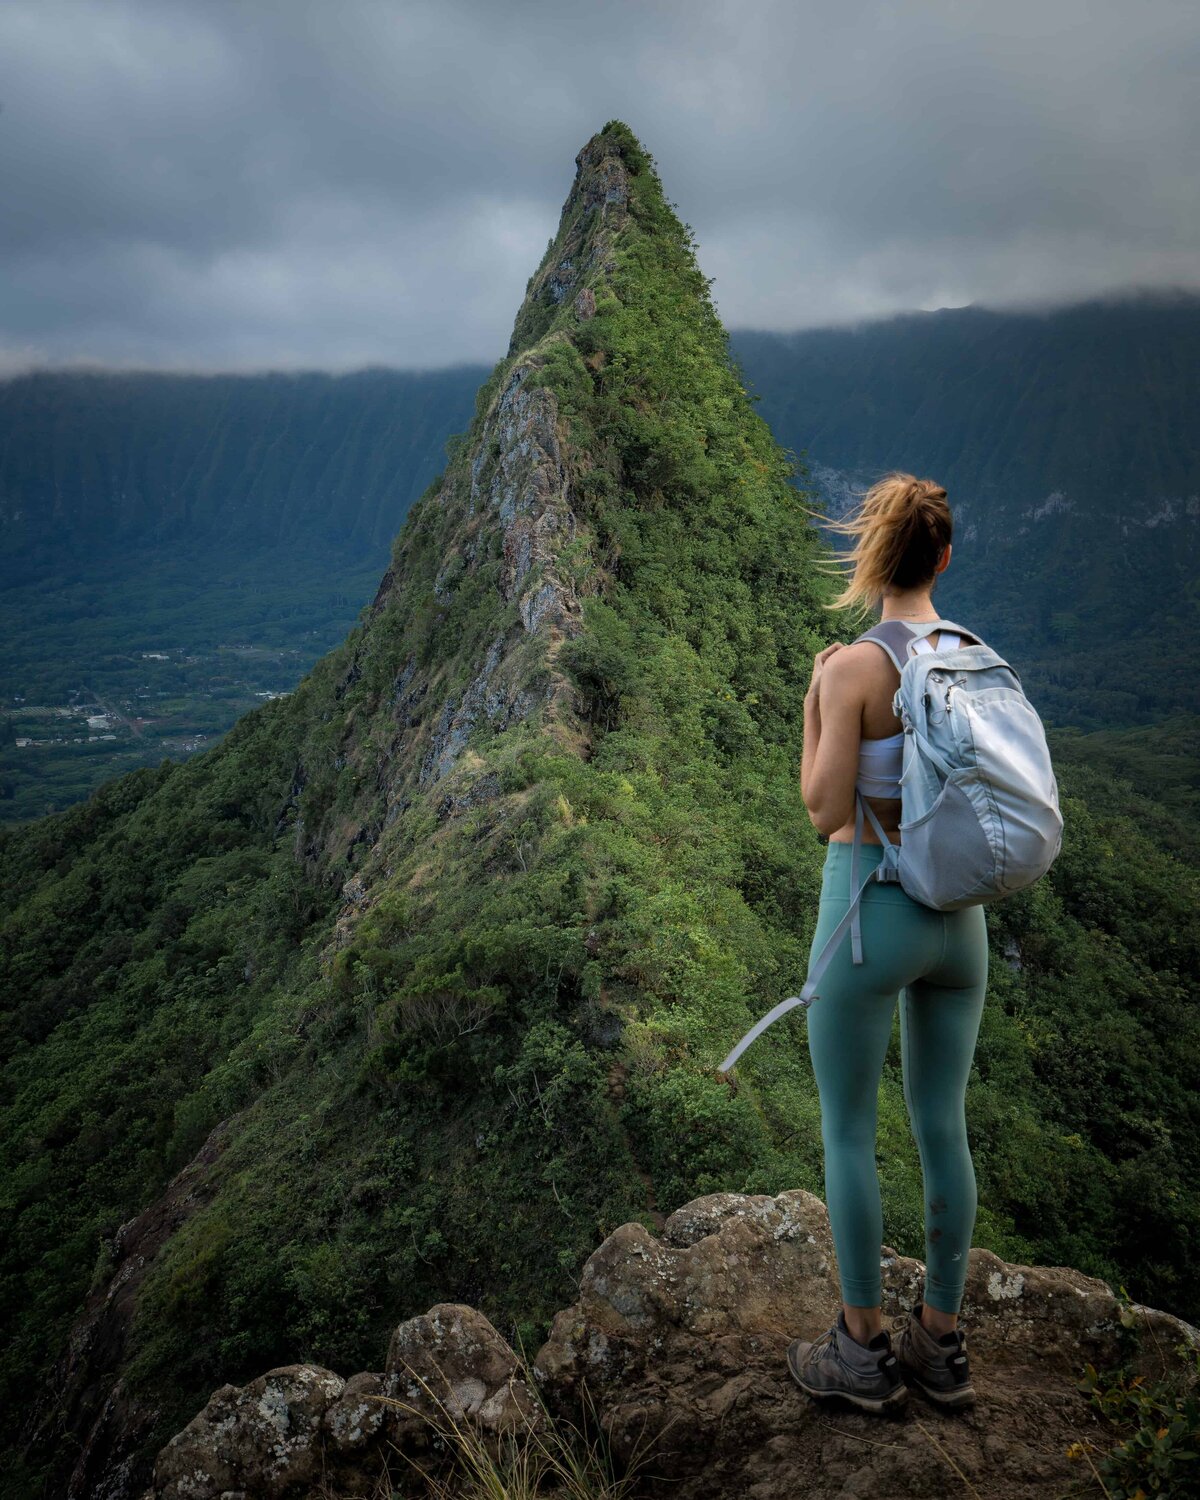 Jess of Jess Wandering wearing Glyder leggings standing on a rock looking at a mountain